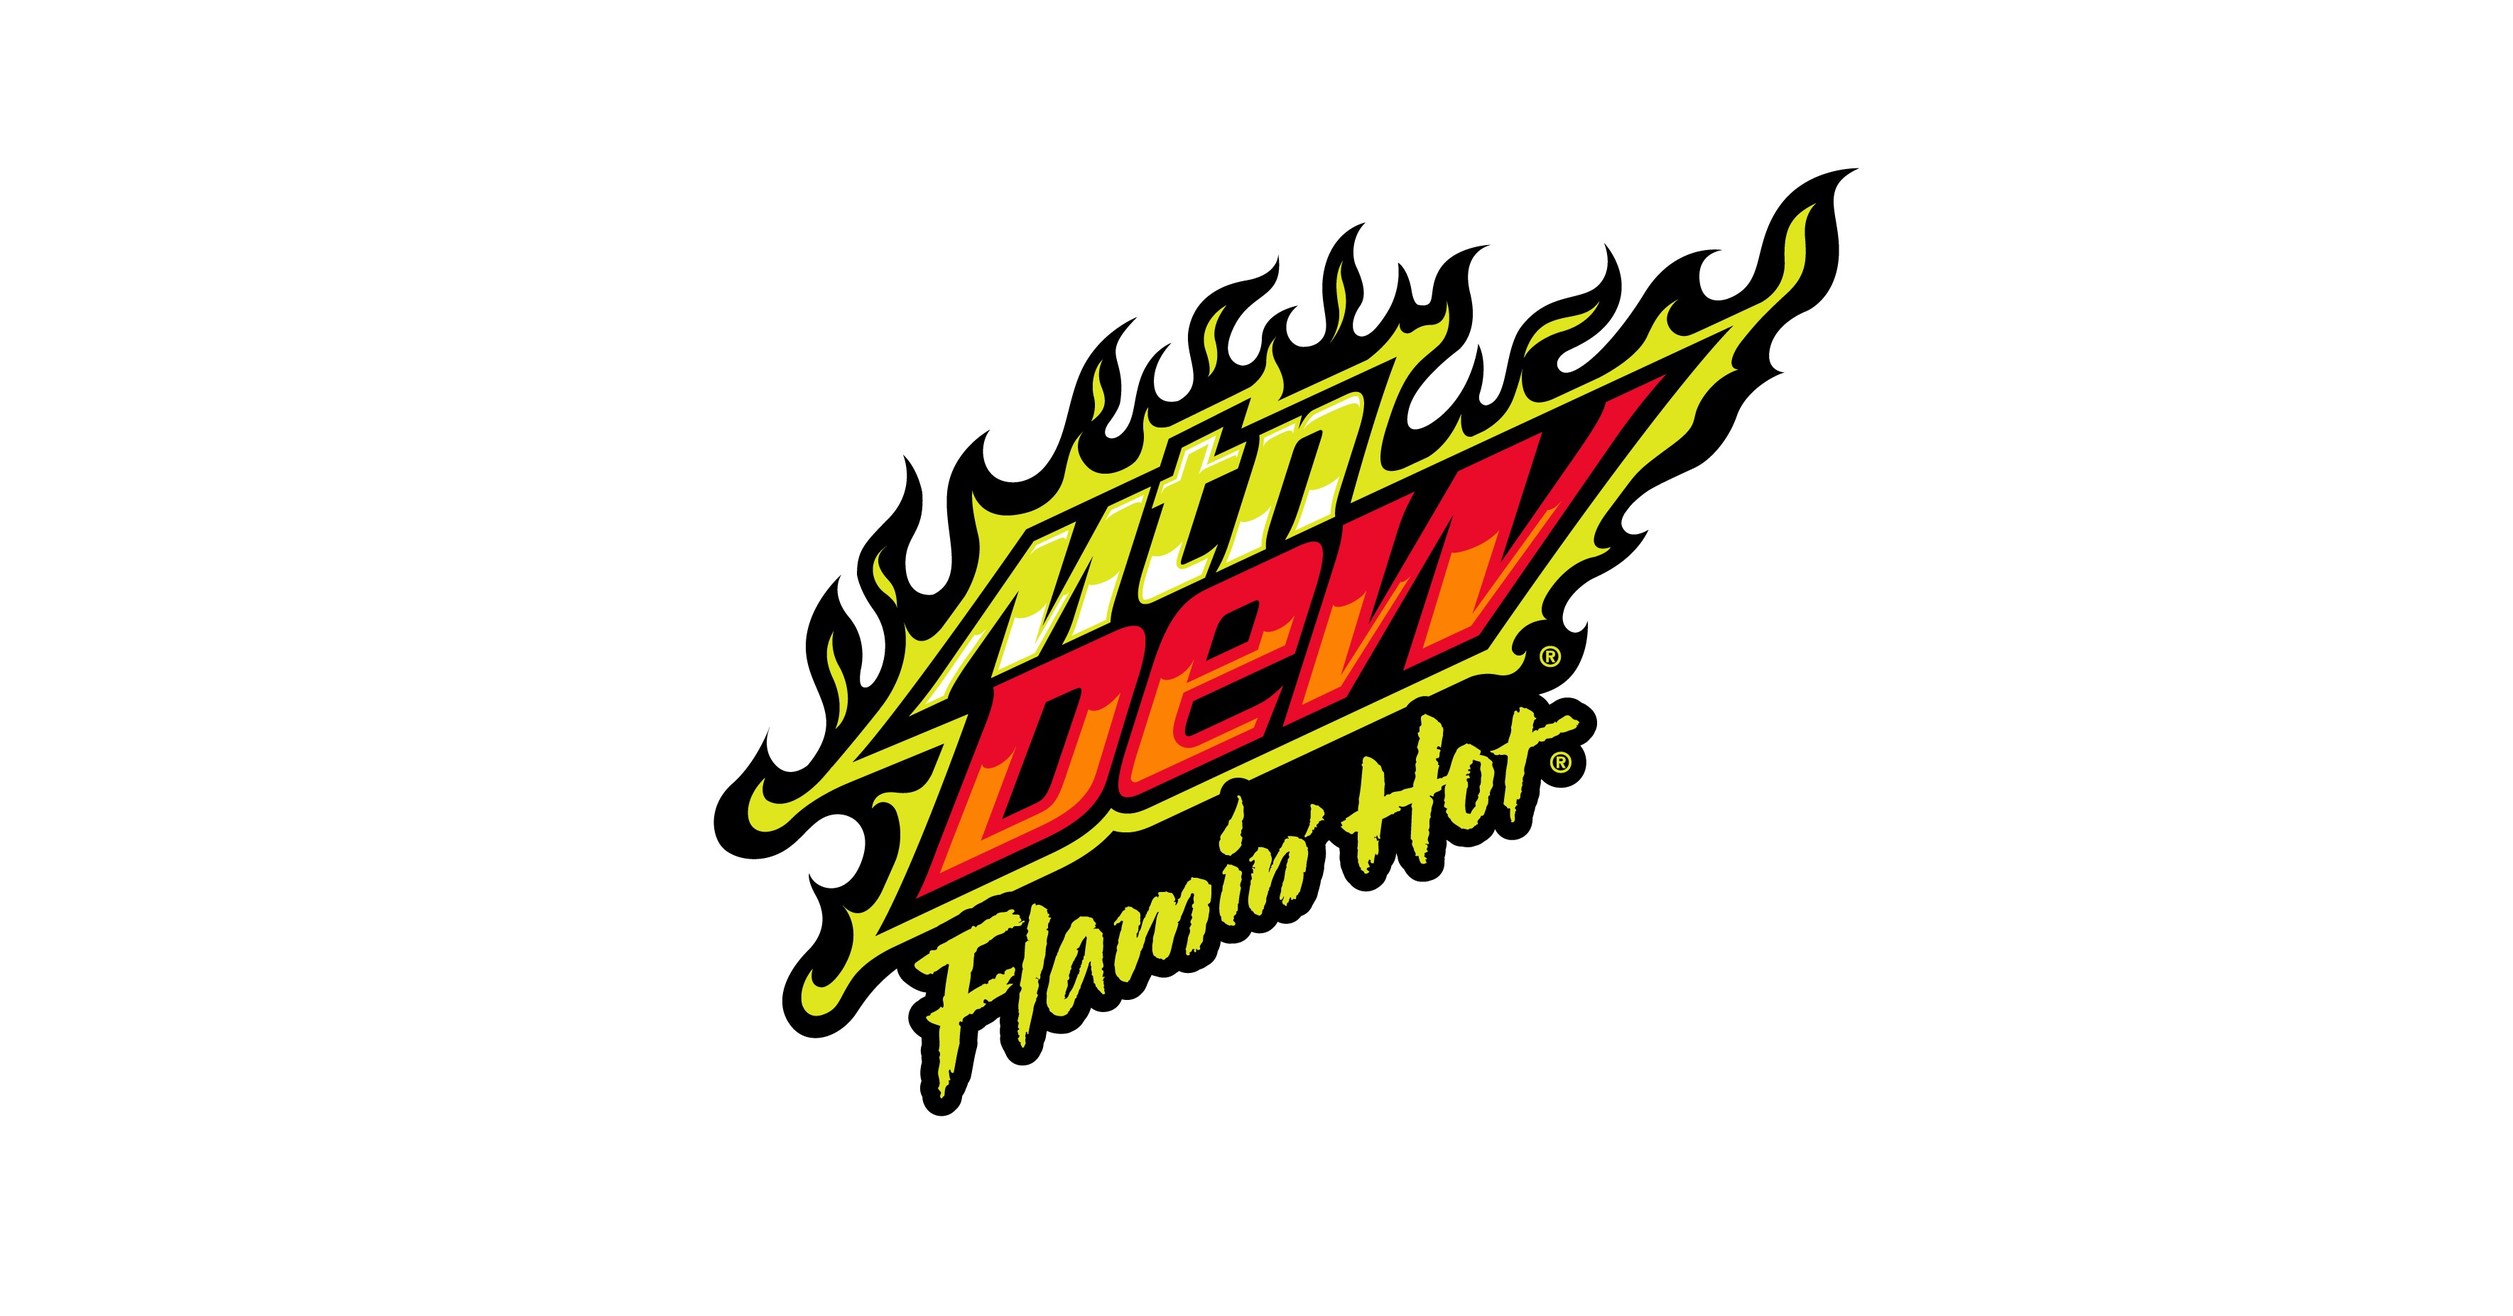 Flamin' Hot Mtn Dew Is Real and You Can Buy It